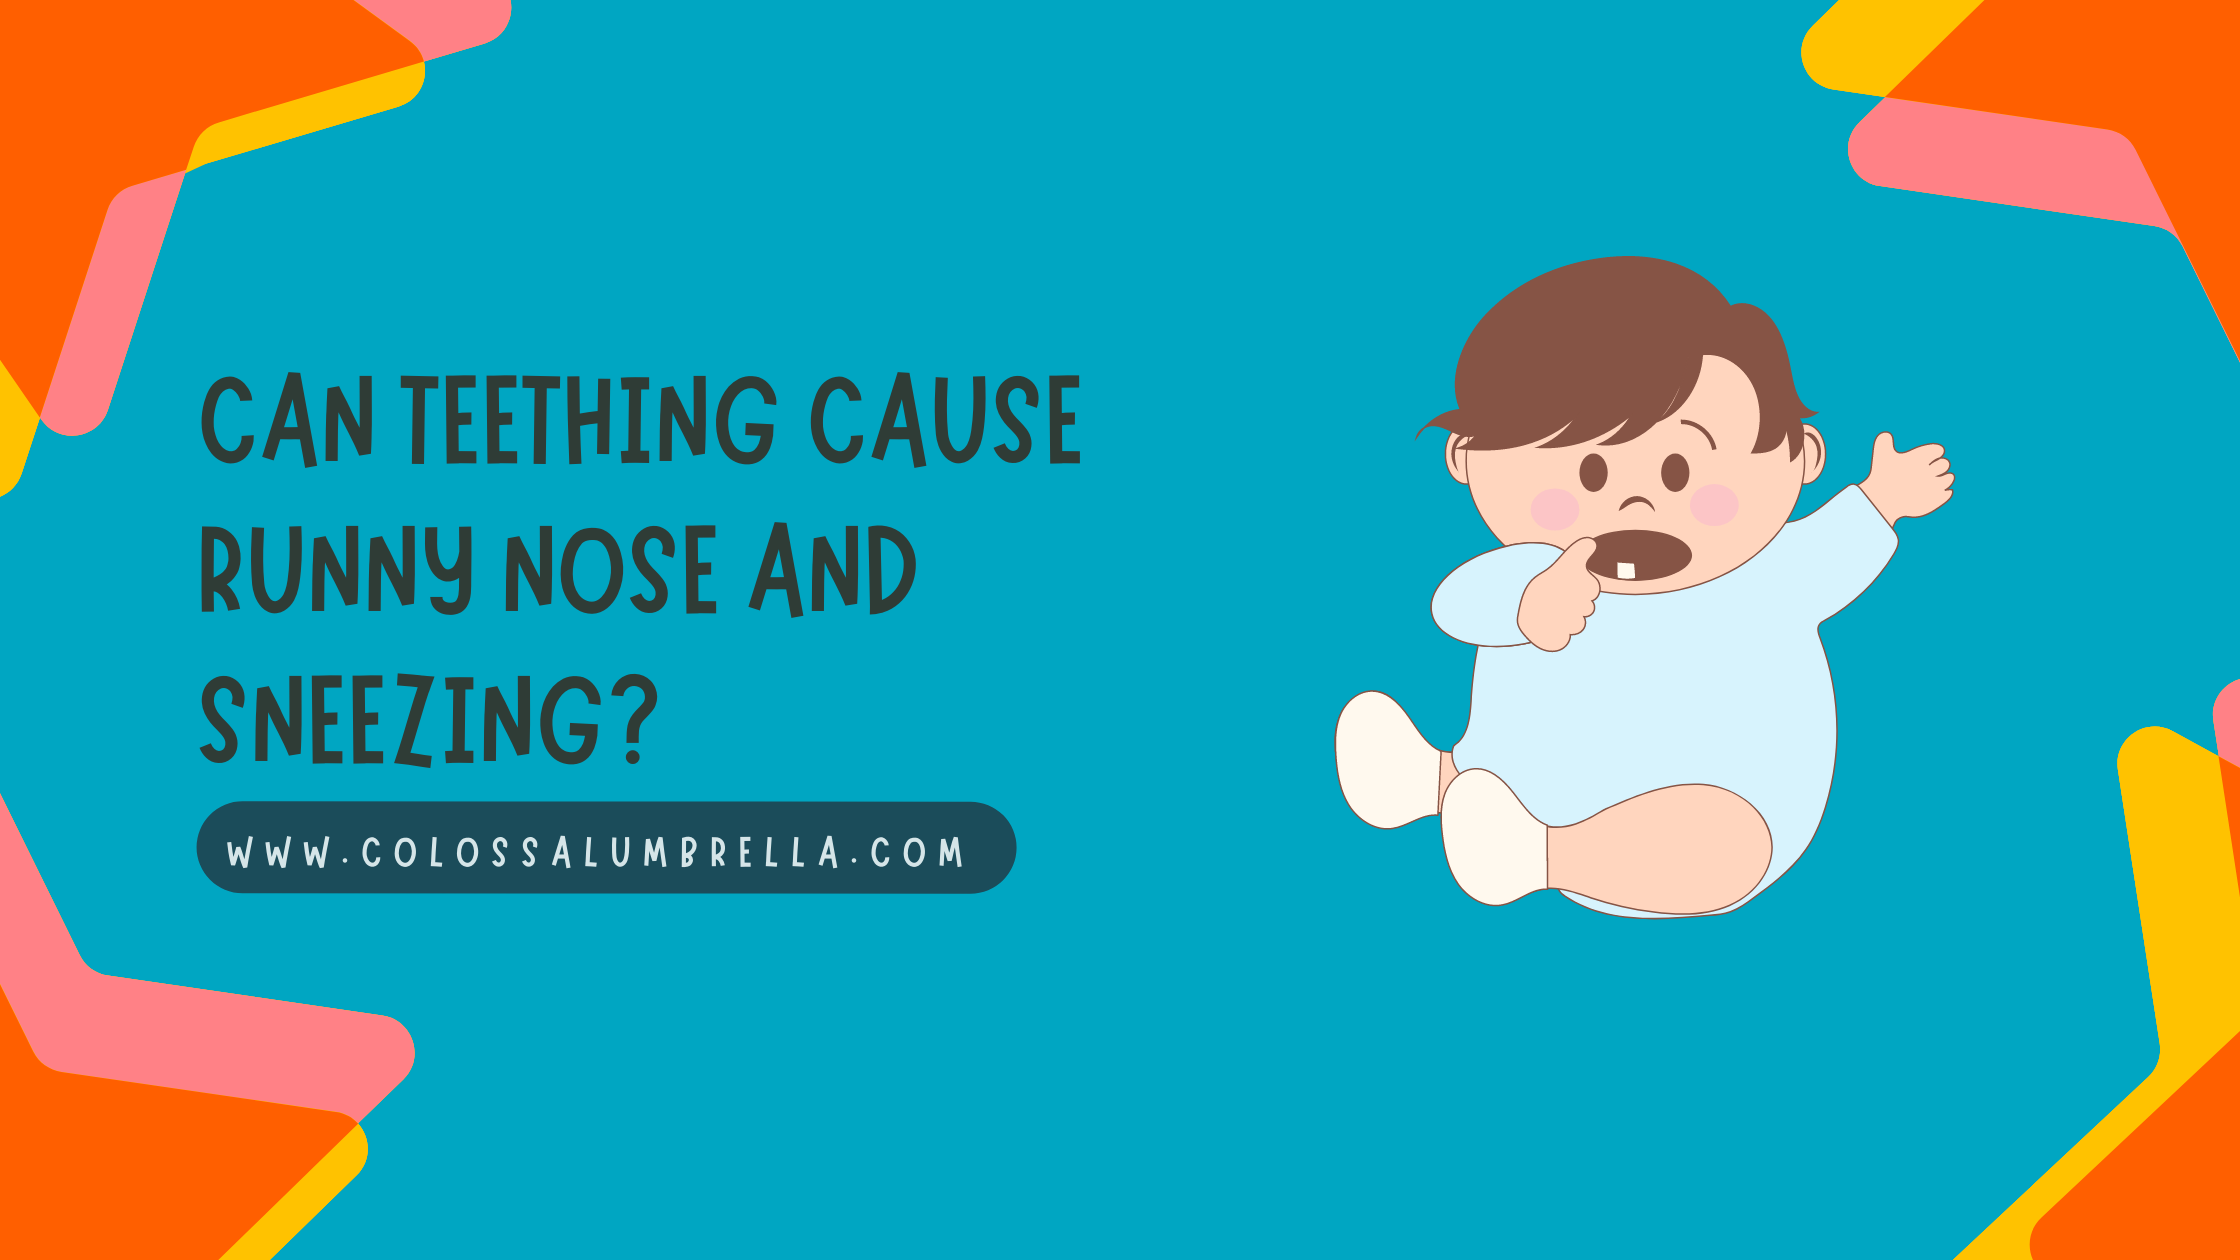 Can Teething Cause a Runny Nose